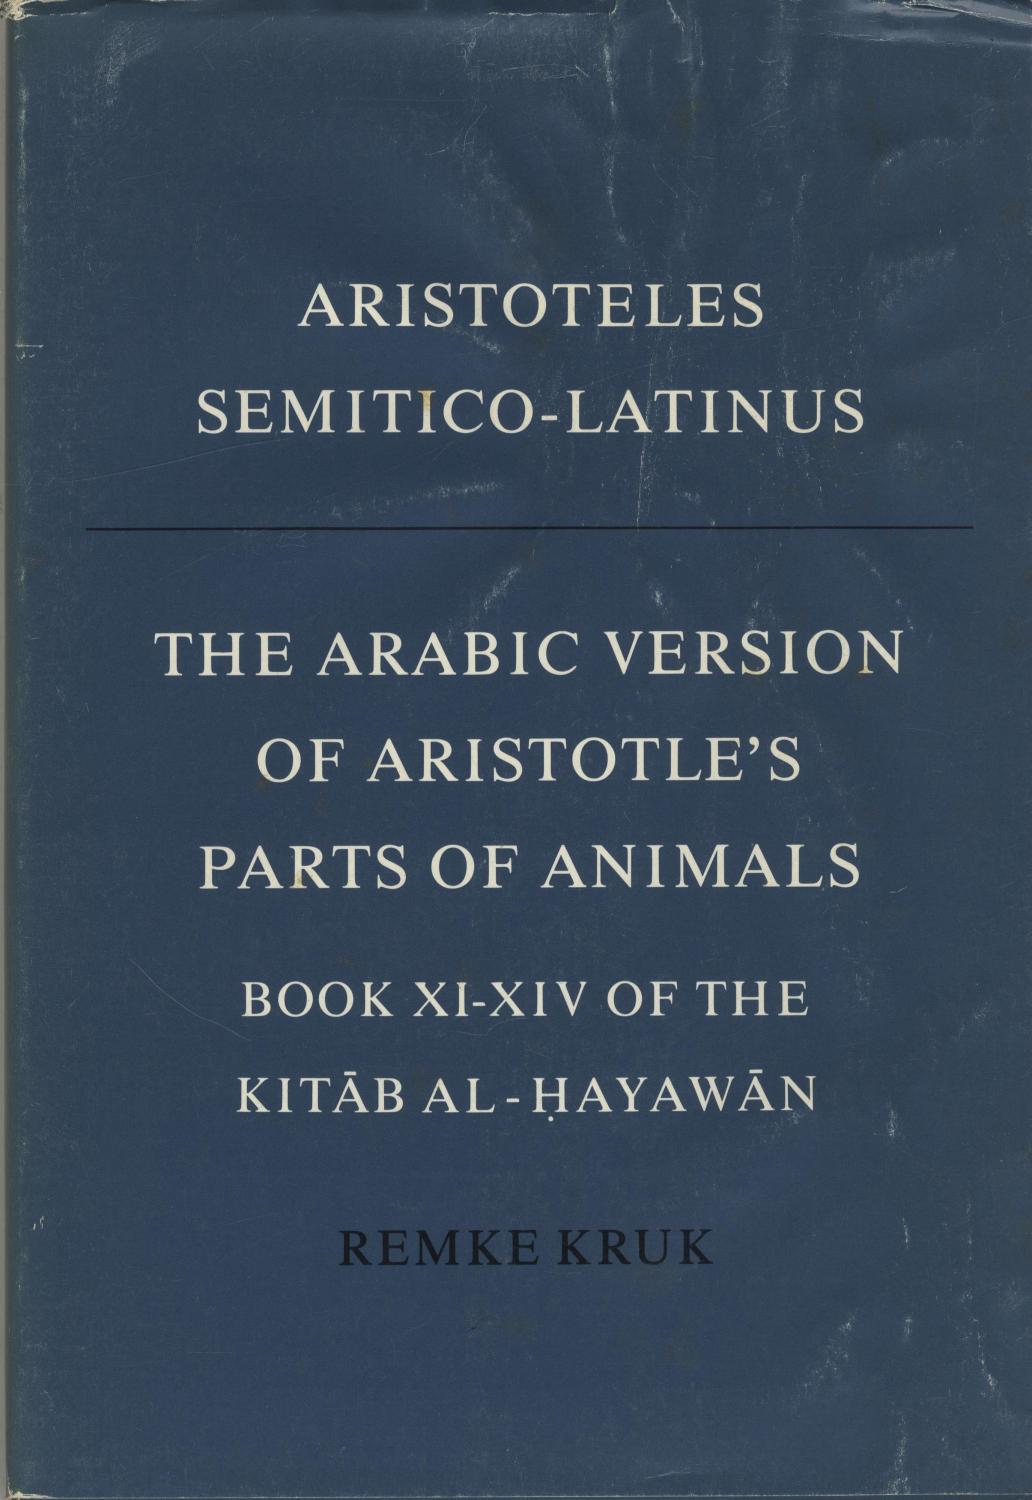 The Arabic Version of Aristotle's Parts of Animals Book XI-XIV of the Kitab al-Hayawan. A Critical Edition with Introduction and Selected Glossary. - Kruk, Remke / Aristotle.